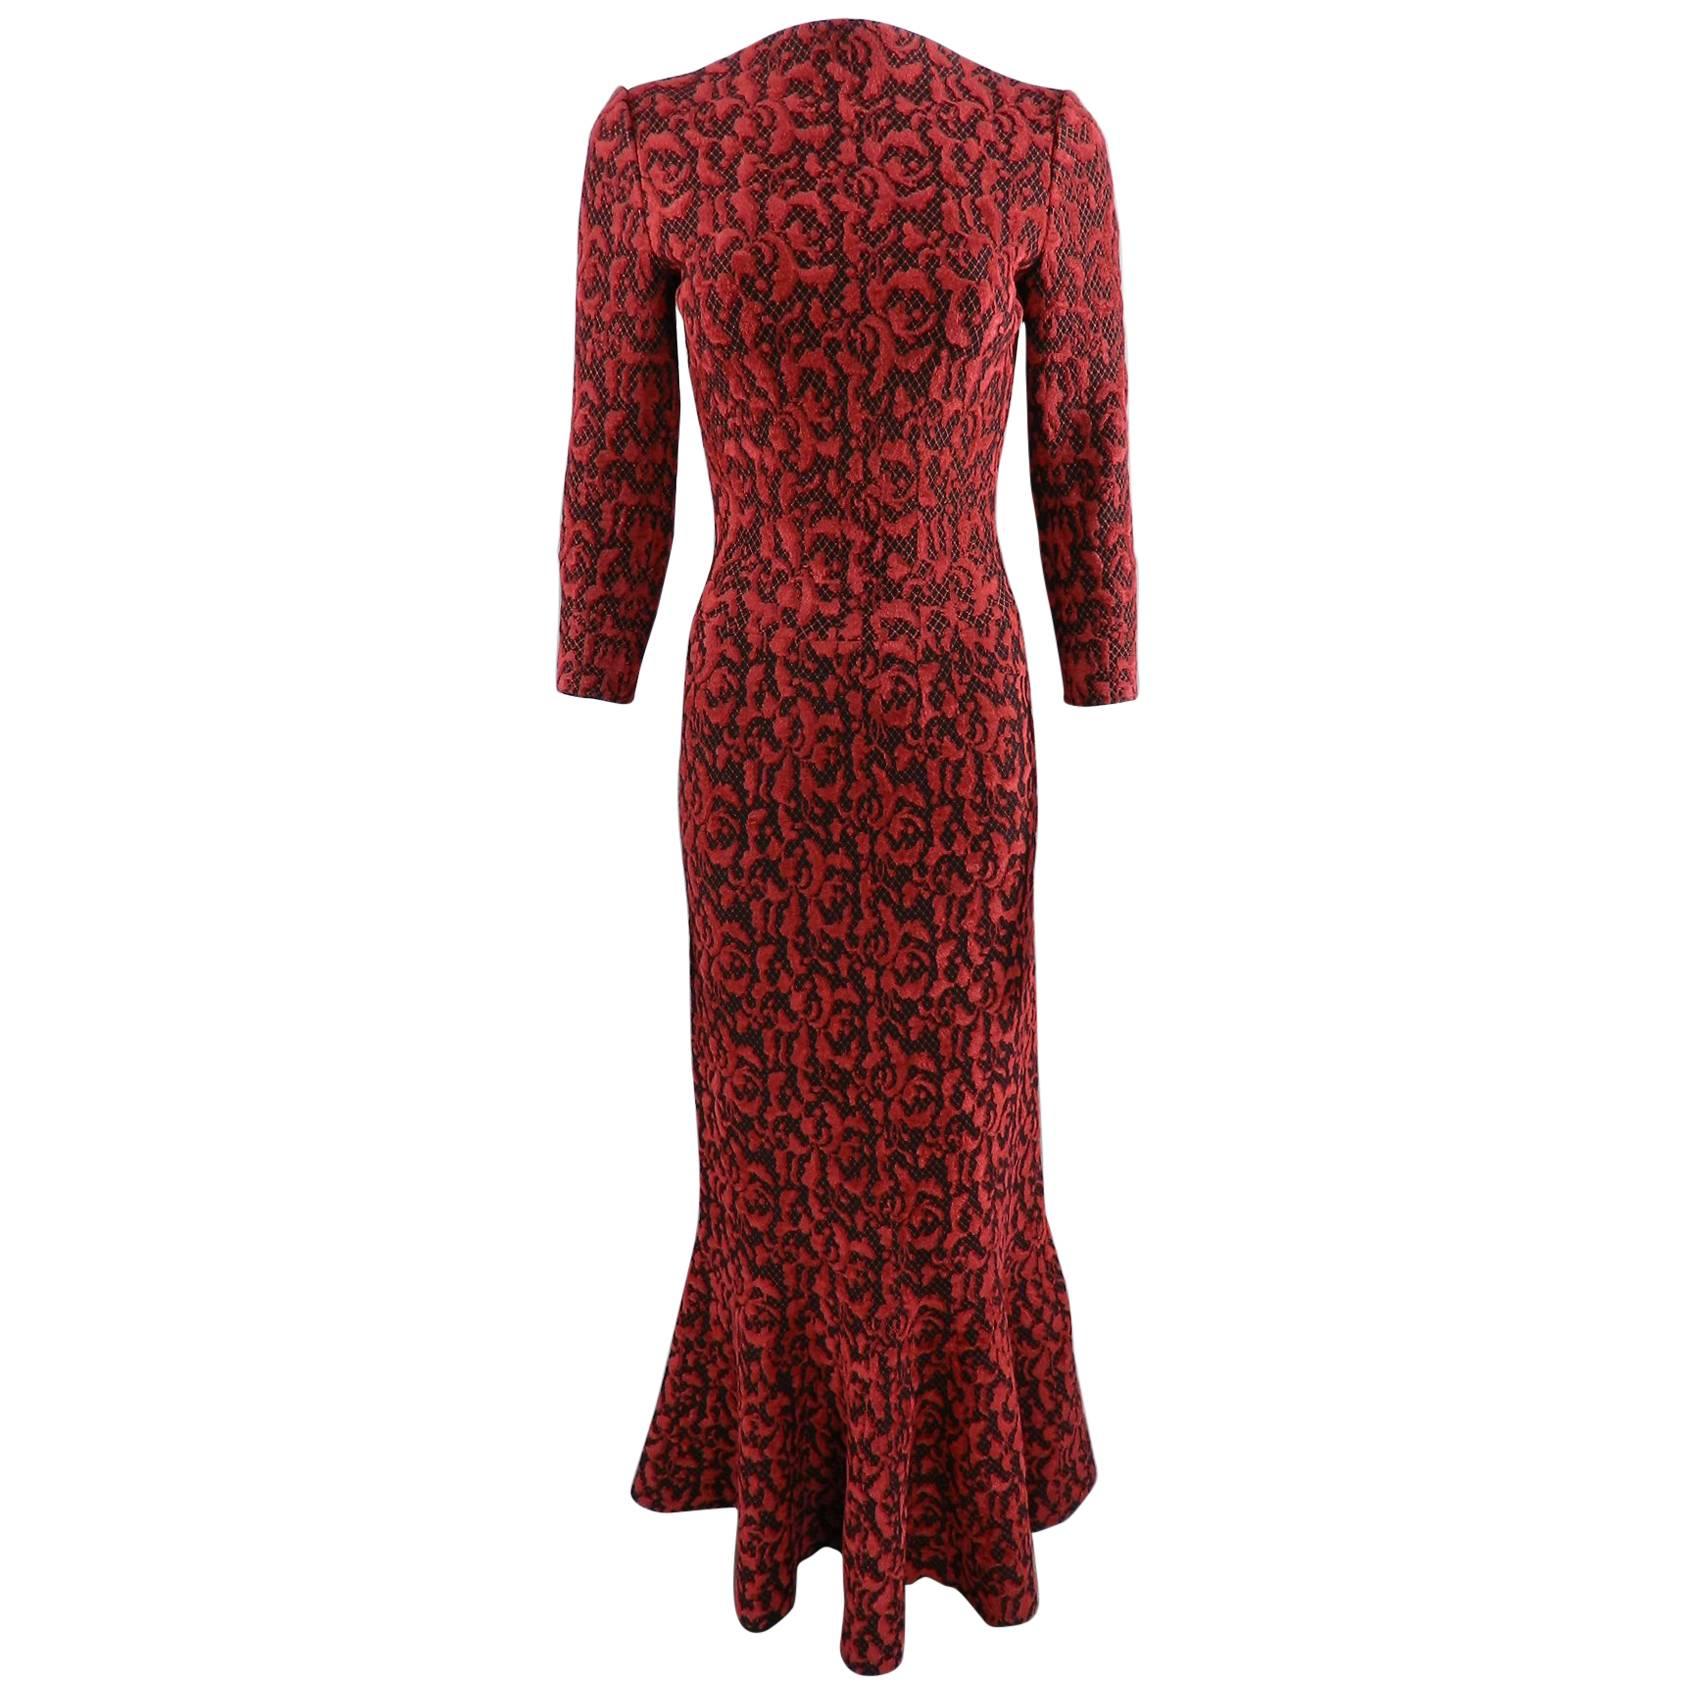 ALAIA Fall 2016 Runway Red and black flocked Lace Overlay Gown